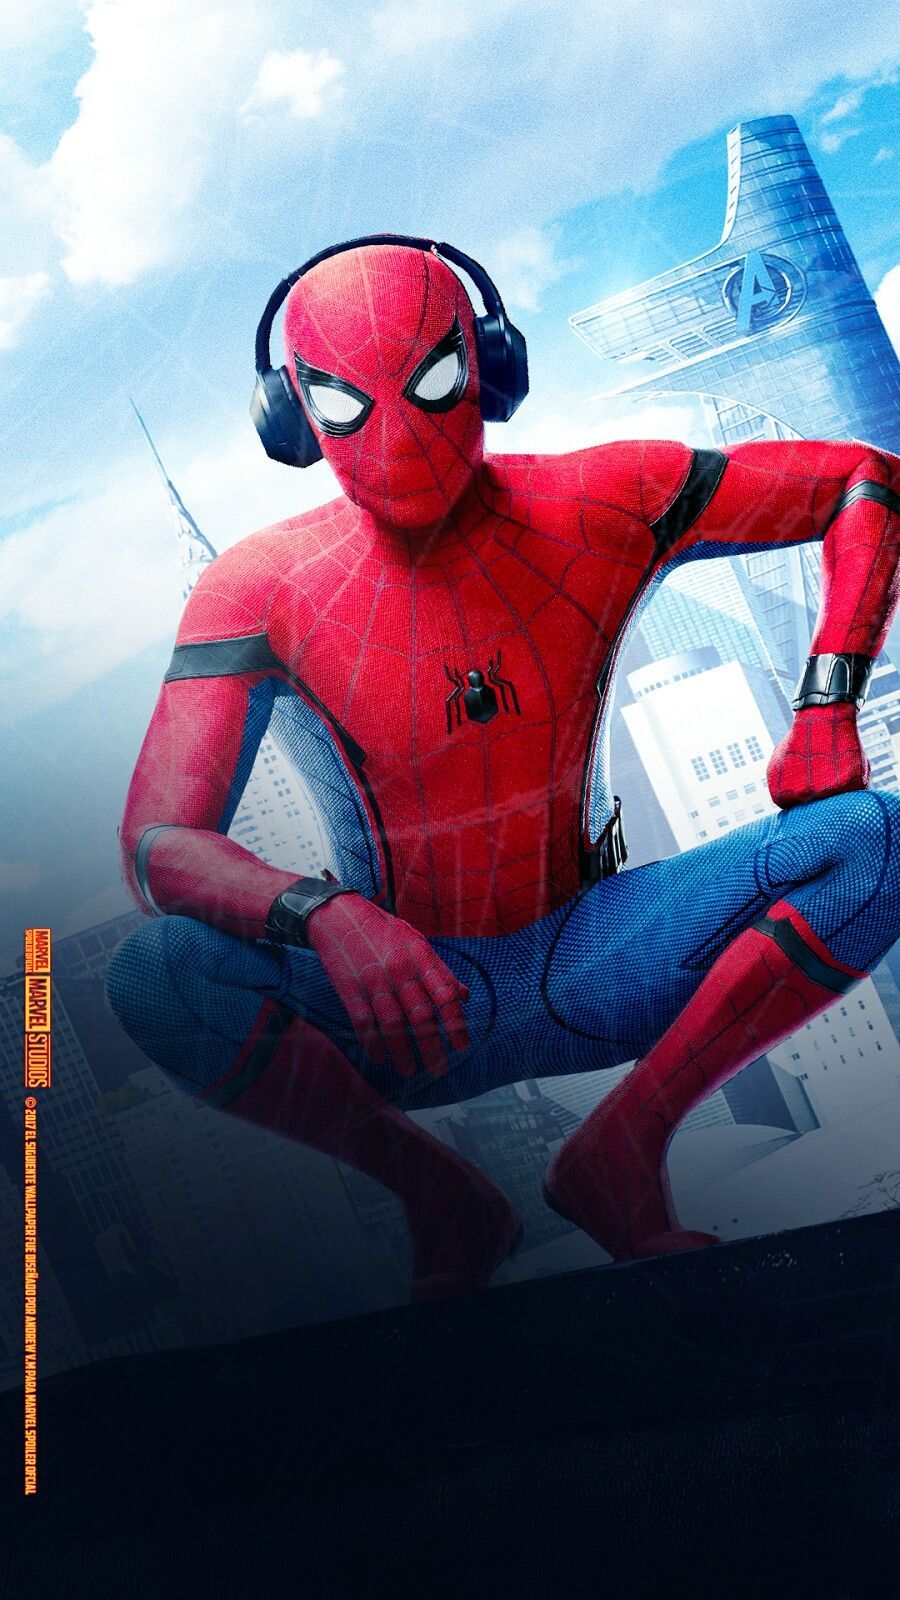 Spiderman Homecoming wallpaper by Xwalls  Download on ZEDGE  7c43